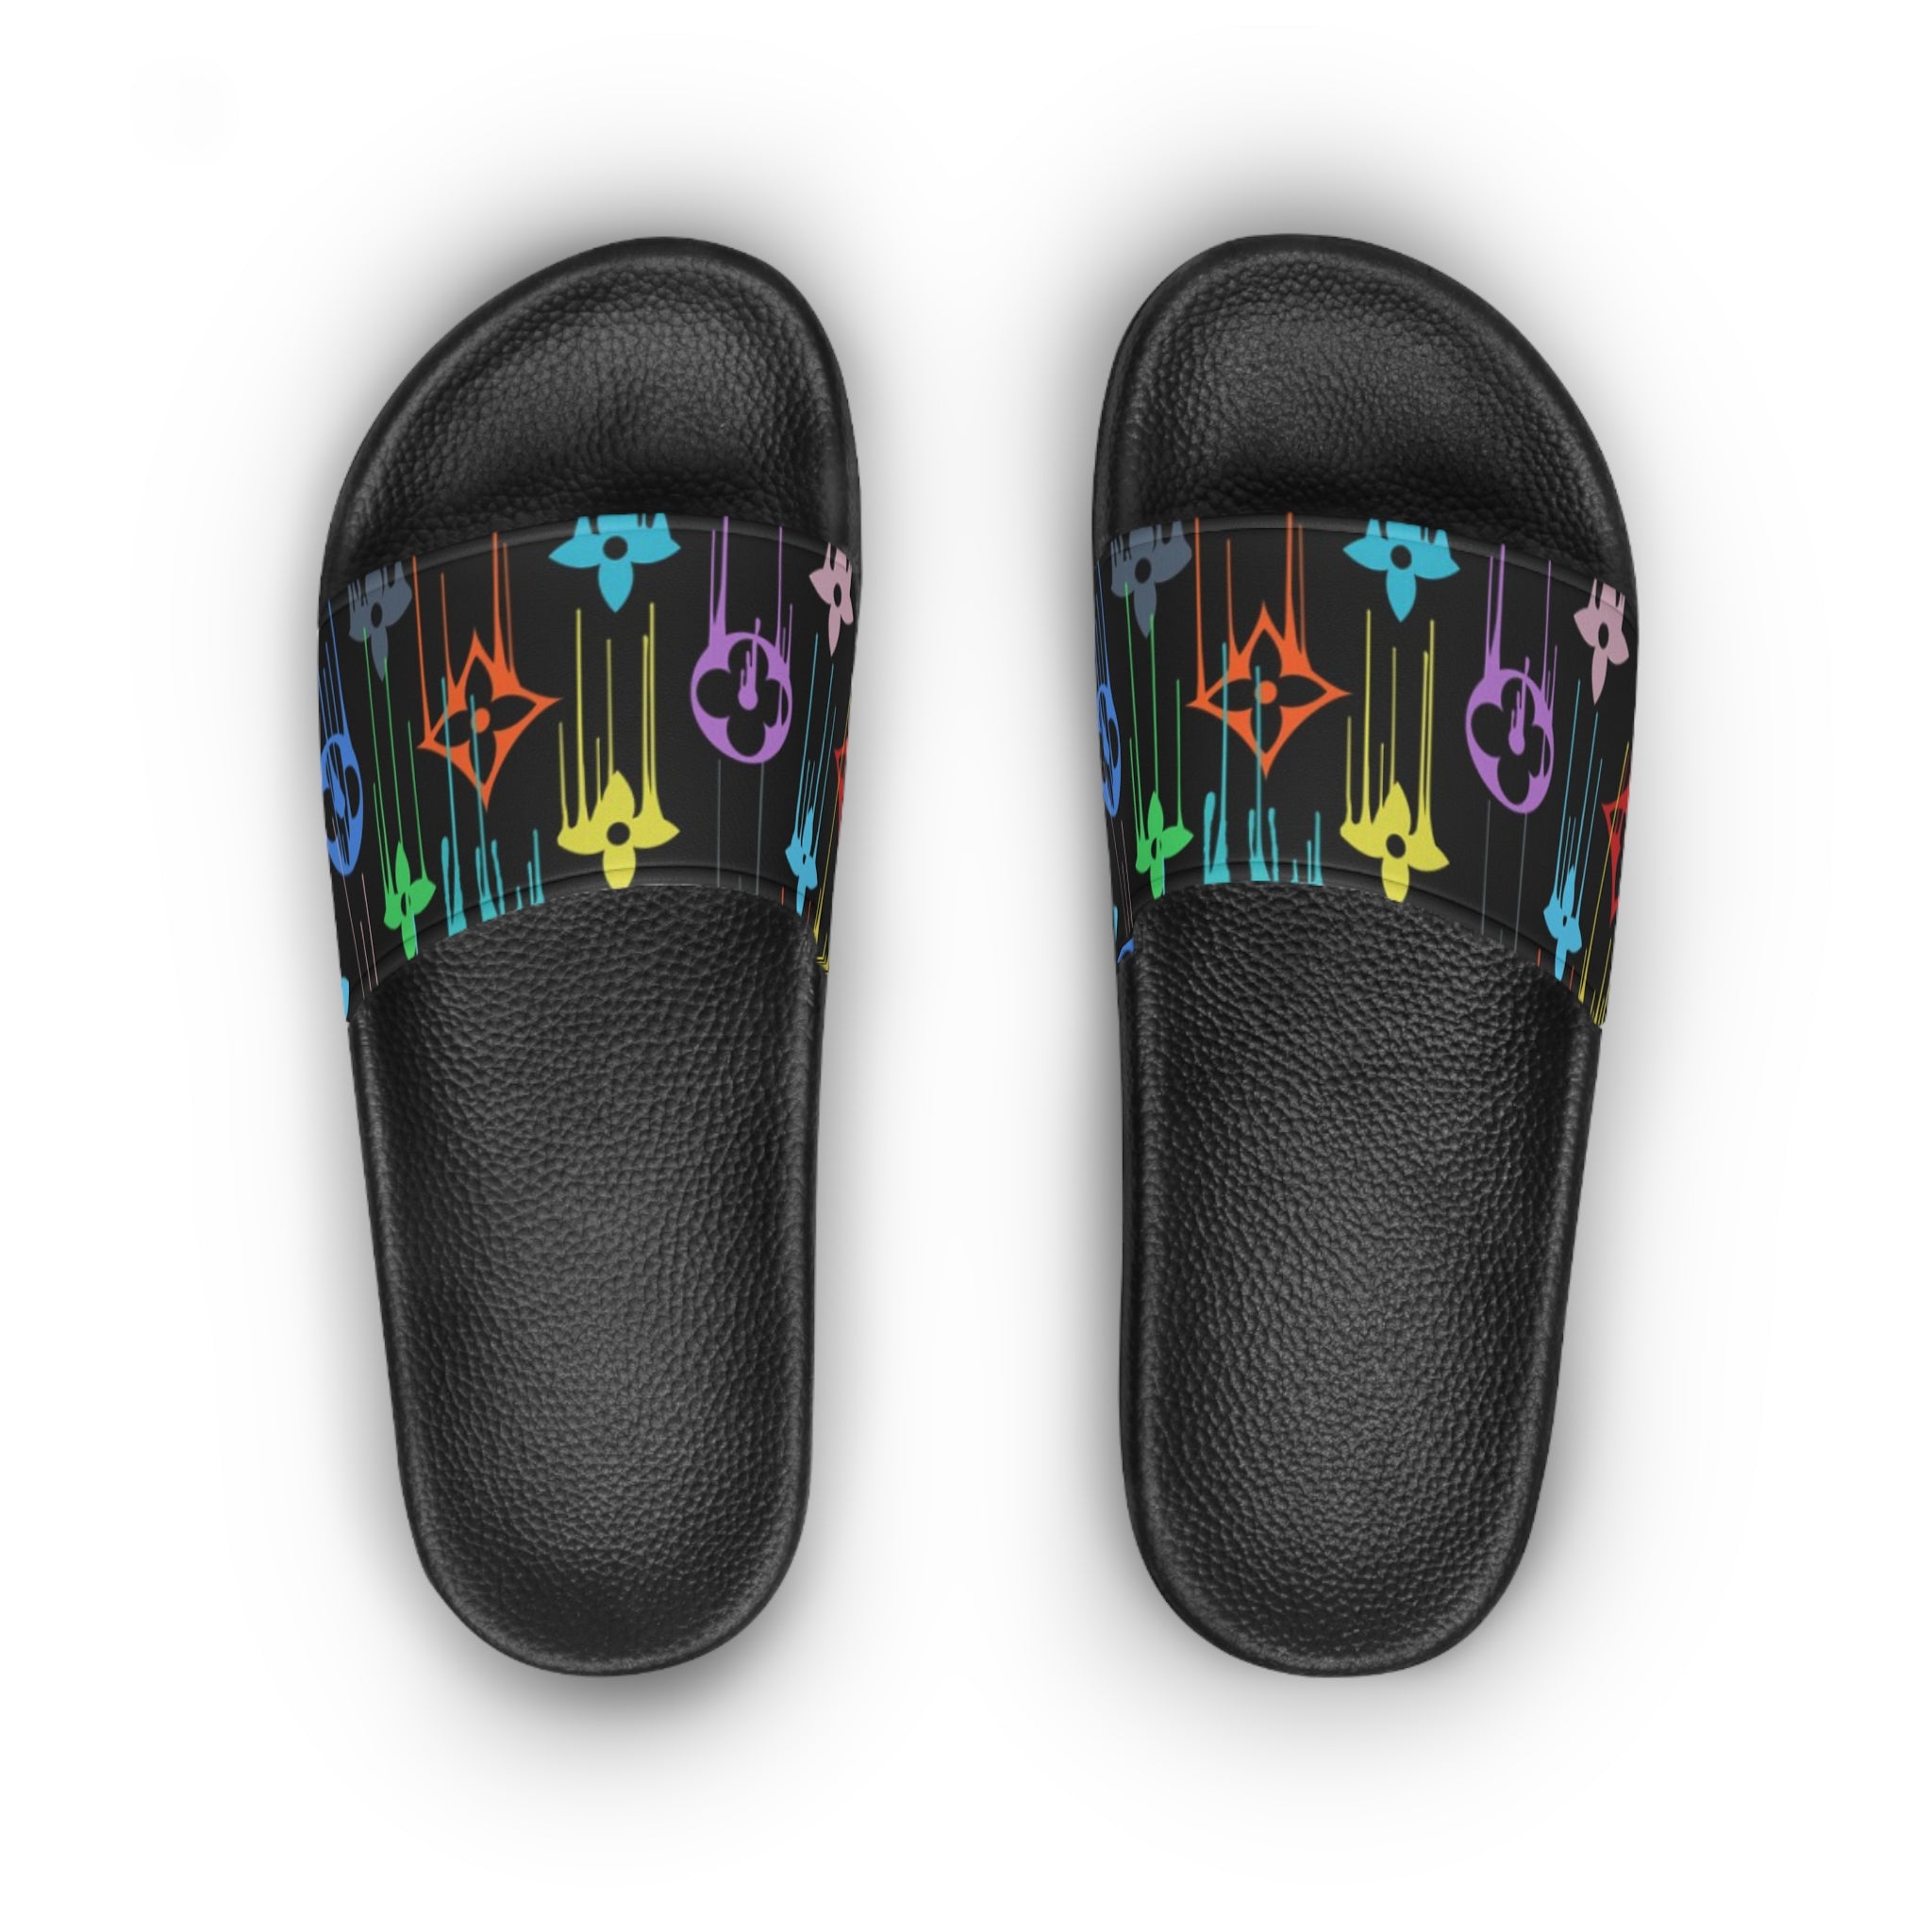  Casual Wear Collection in Multi-Color Dripping Icons Women's Slide Sandals, Slide Sandals for Women, Plaid Slip Ons SandalsBlacksoleUS5